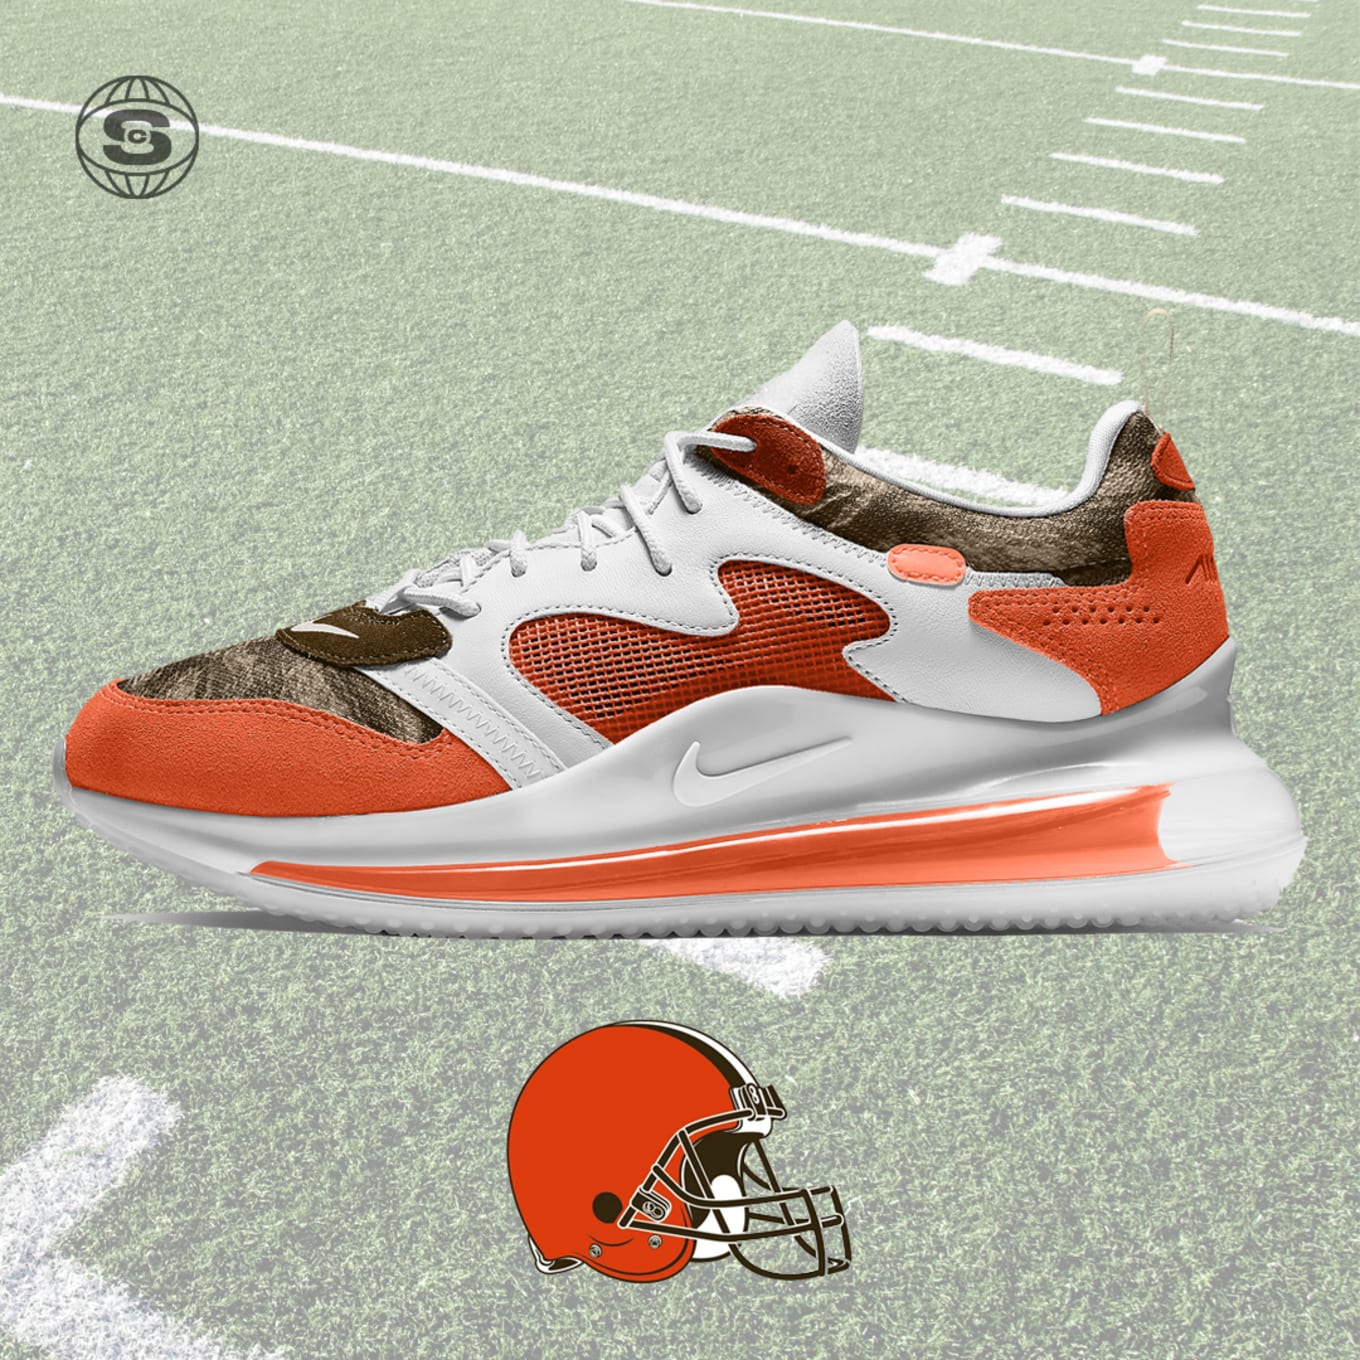 cleveland browns nike tennis shoes